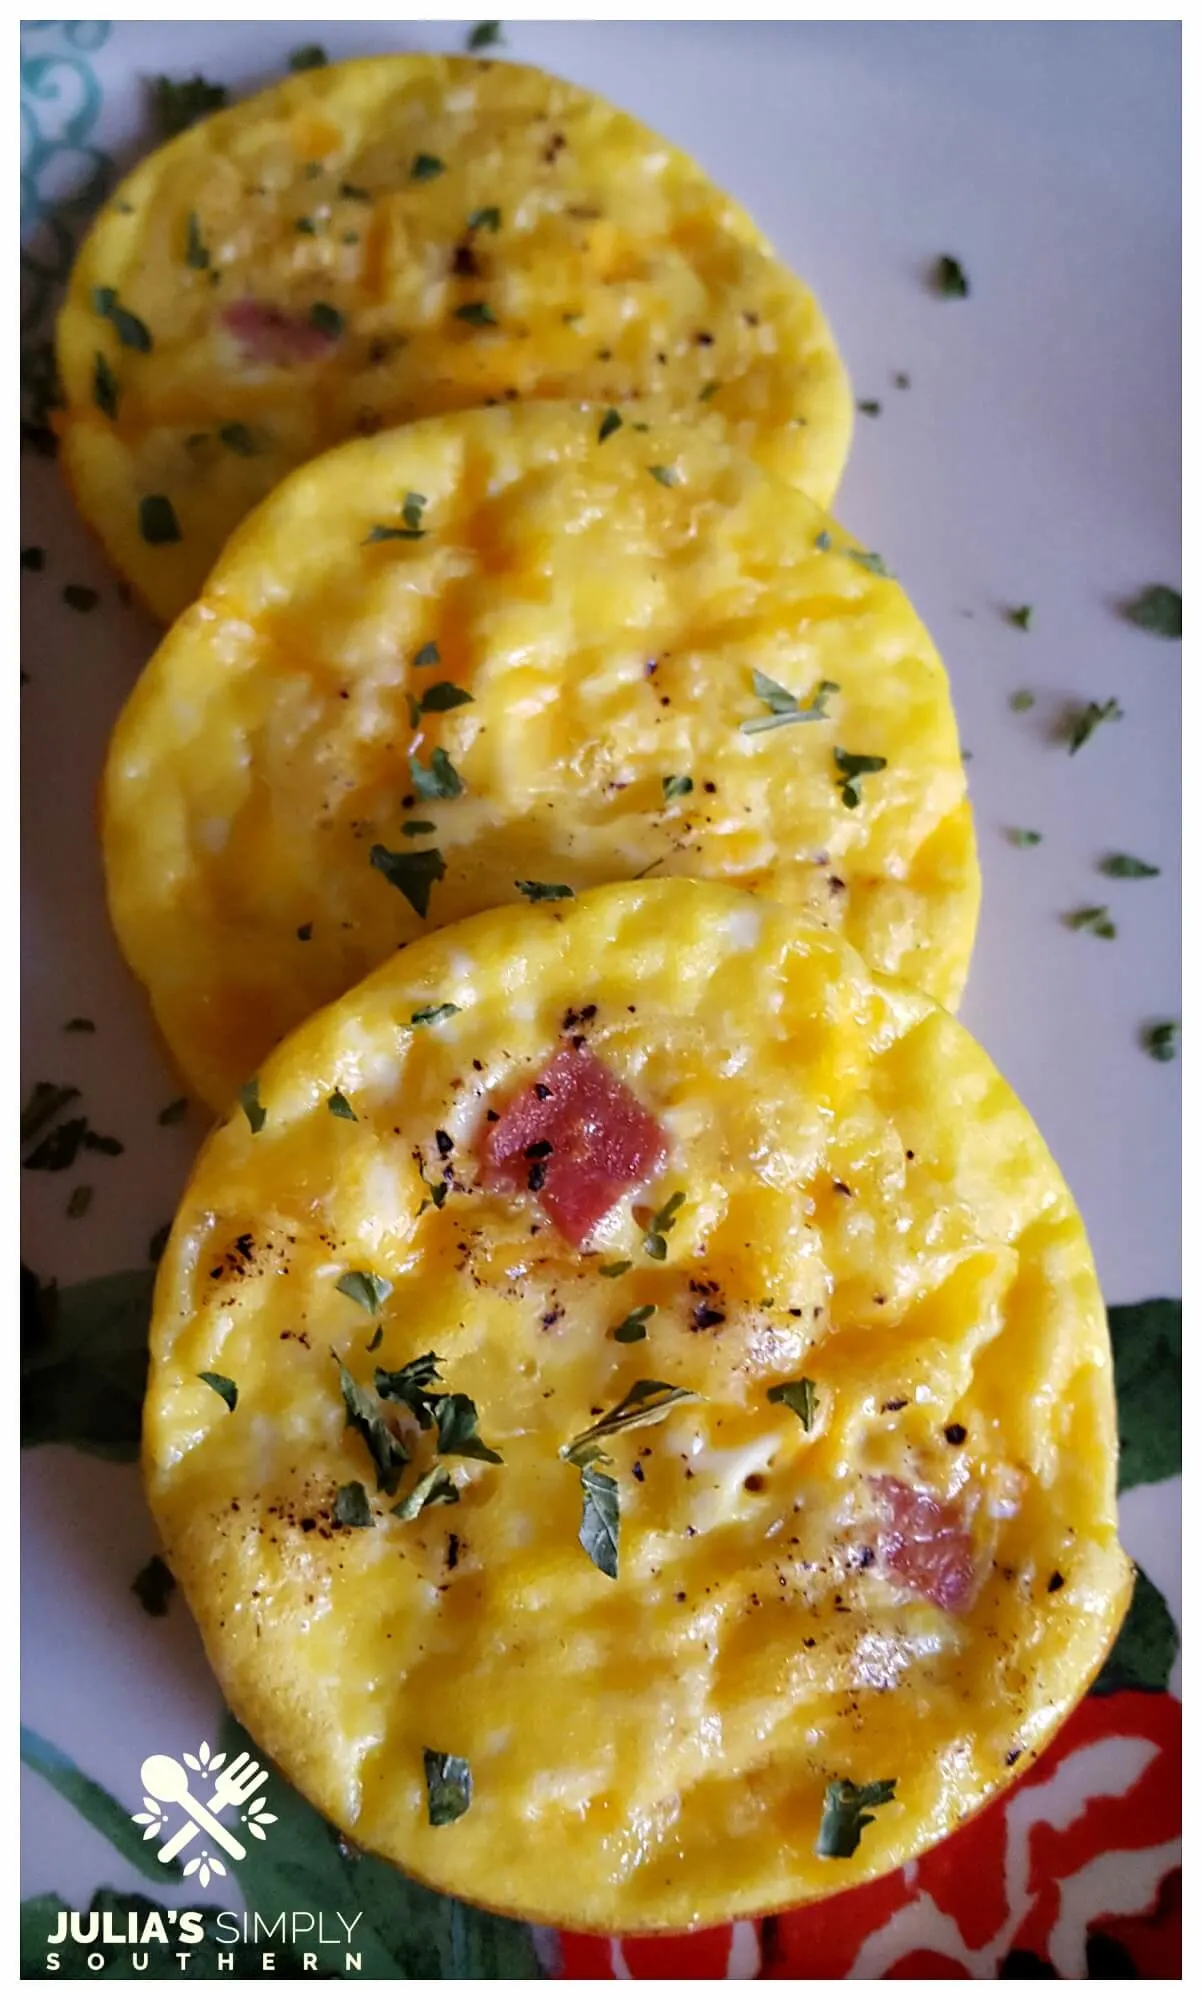 https://juliassimplysouthern.com/wp-content/uploads/Ham-Egg-and-Cheese-Breakfast-Muffins-Mini-Quiche-Julias-Simply-Southern.jpg.webp